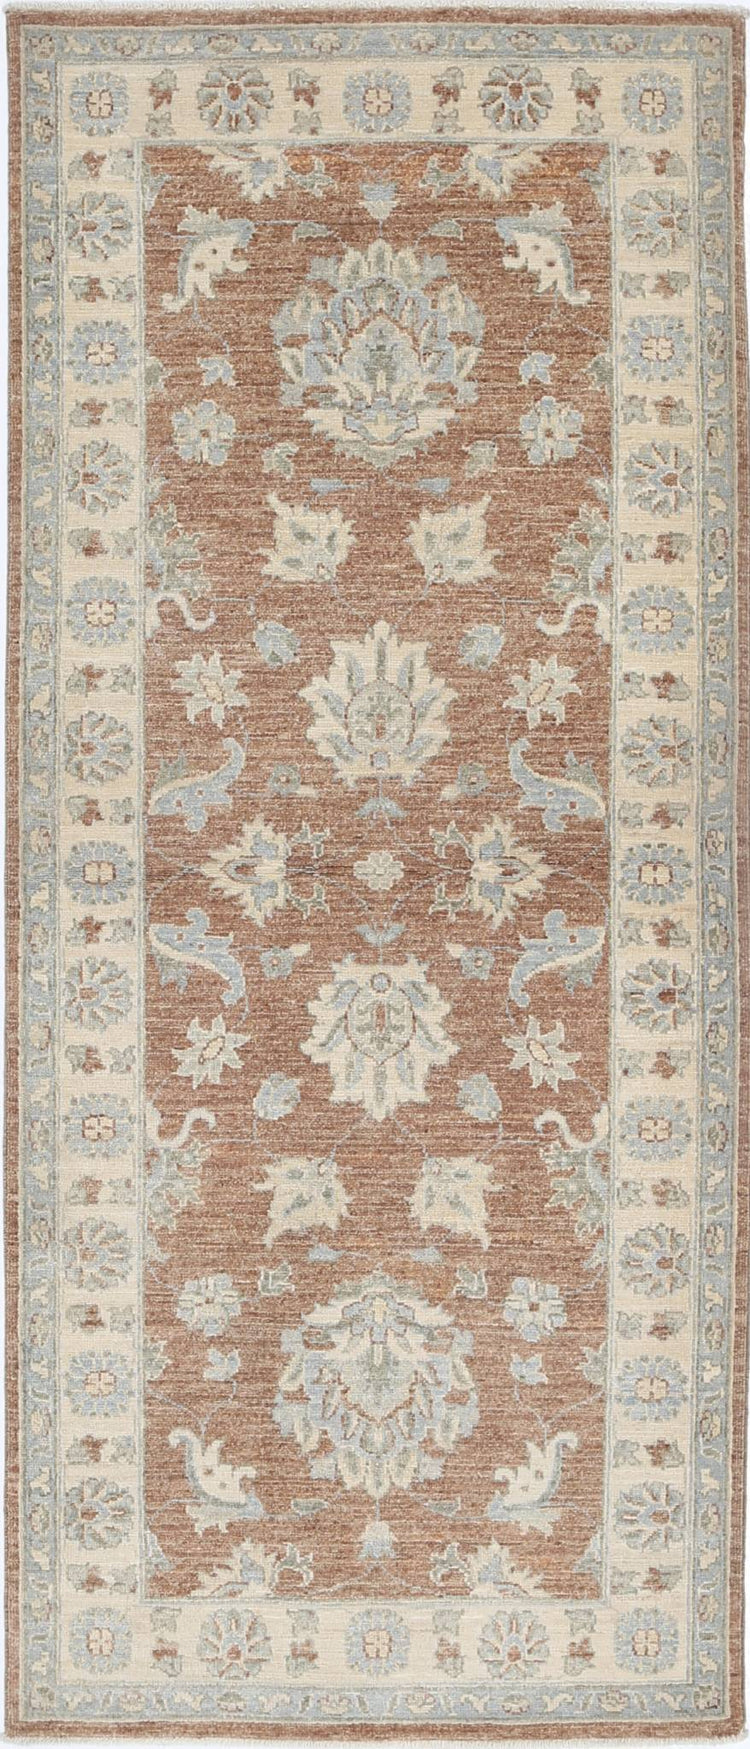 Traditional Hand Knotted Ziegler Farhan Wool Rug of Size 2'7'' X 6'5'' in Brown and Ivory Colors - Made in Afghanistan